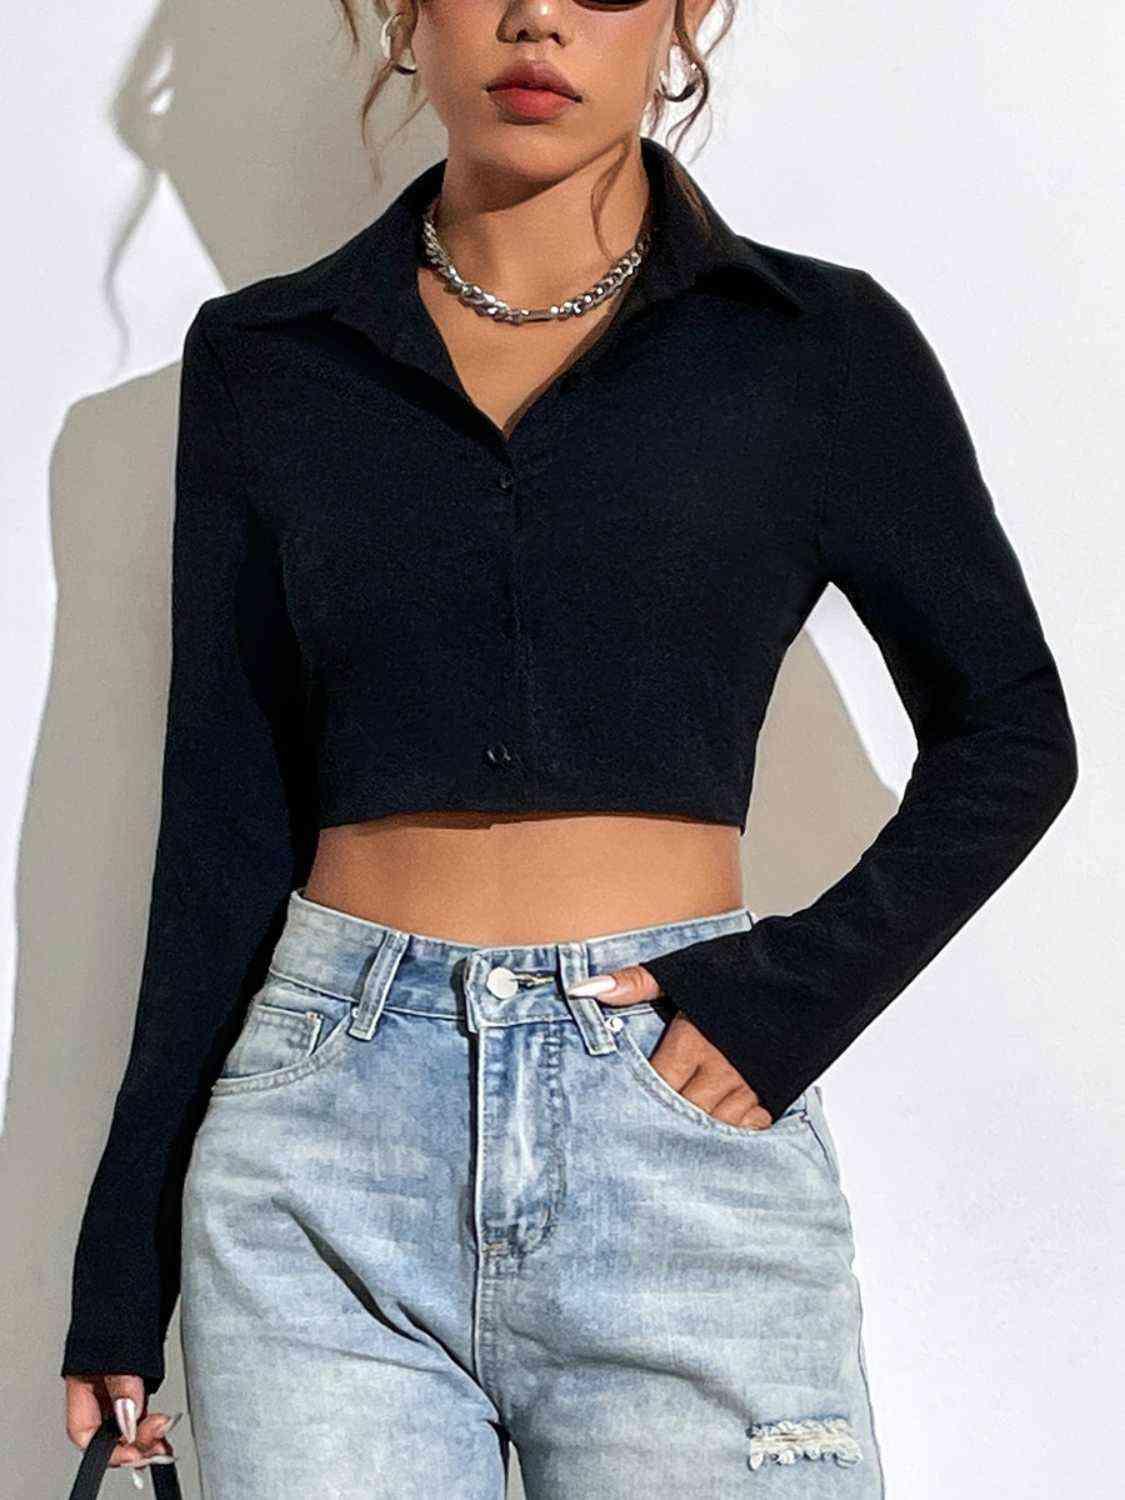 a woman wearing a black crop top and jeans